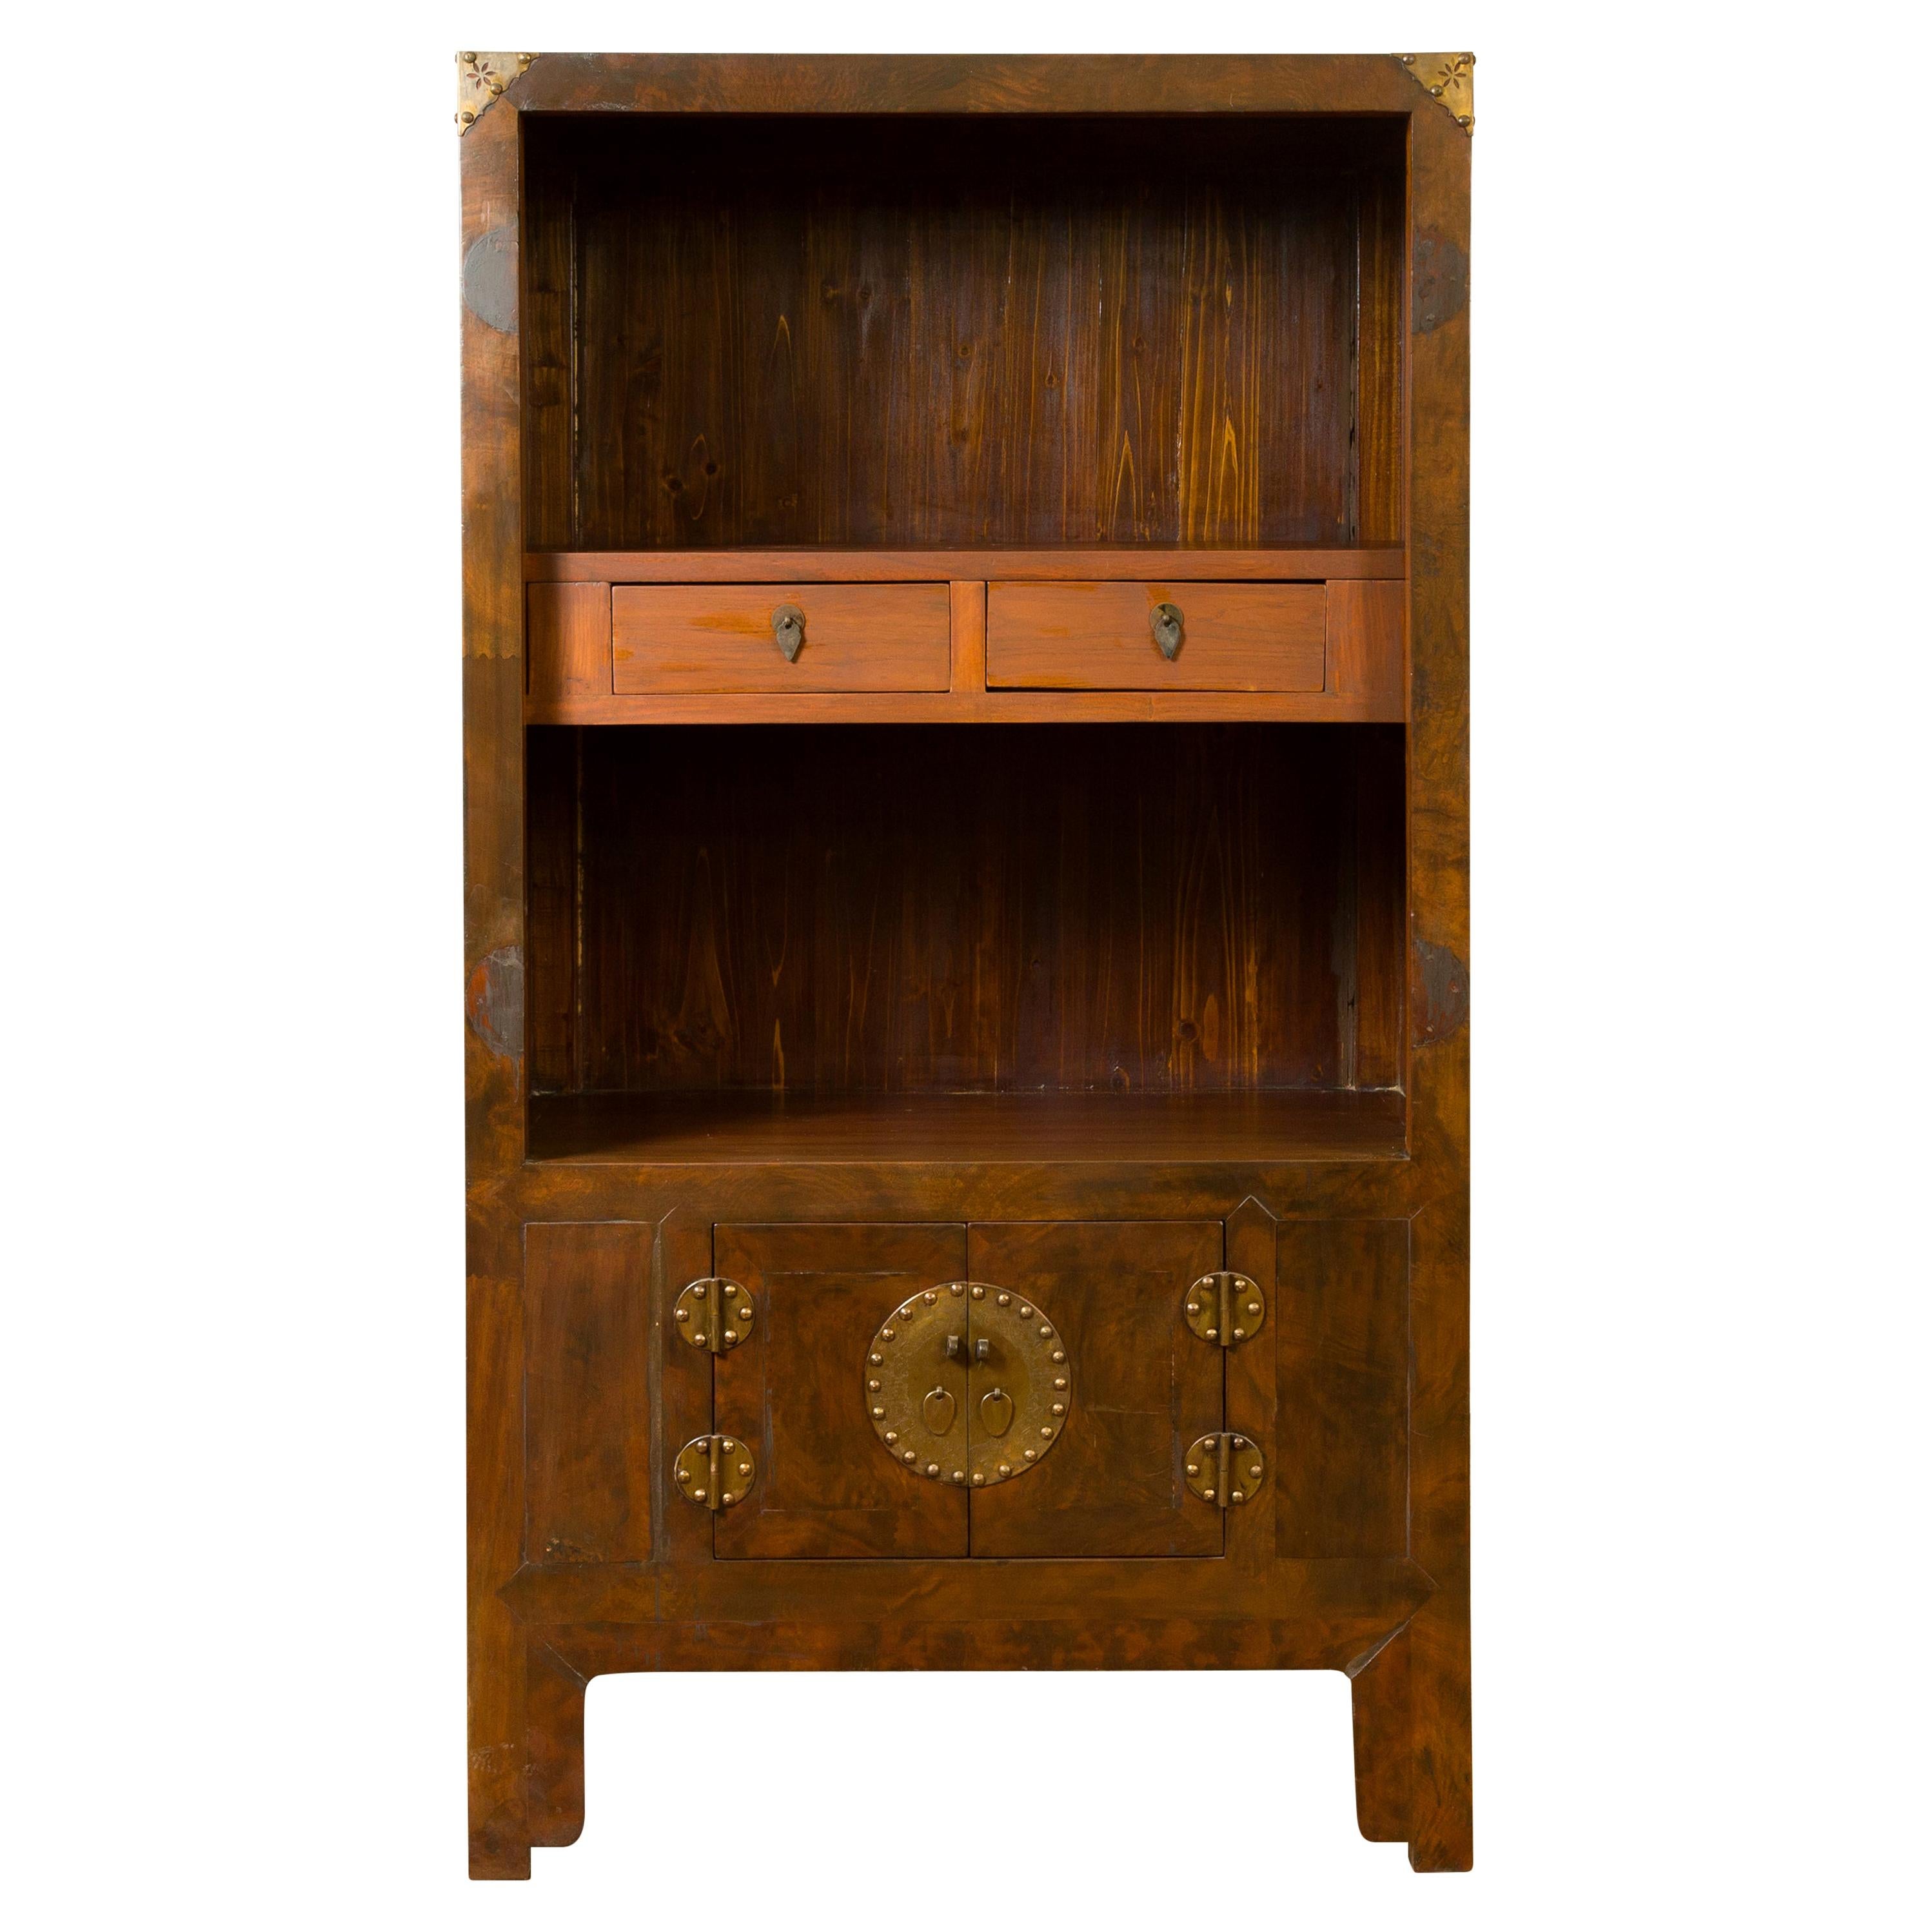 Chinese 19th Century Elmwood Bookcase with Doors, Drawers and Brass Hardware For Sale